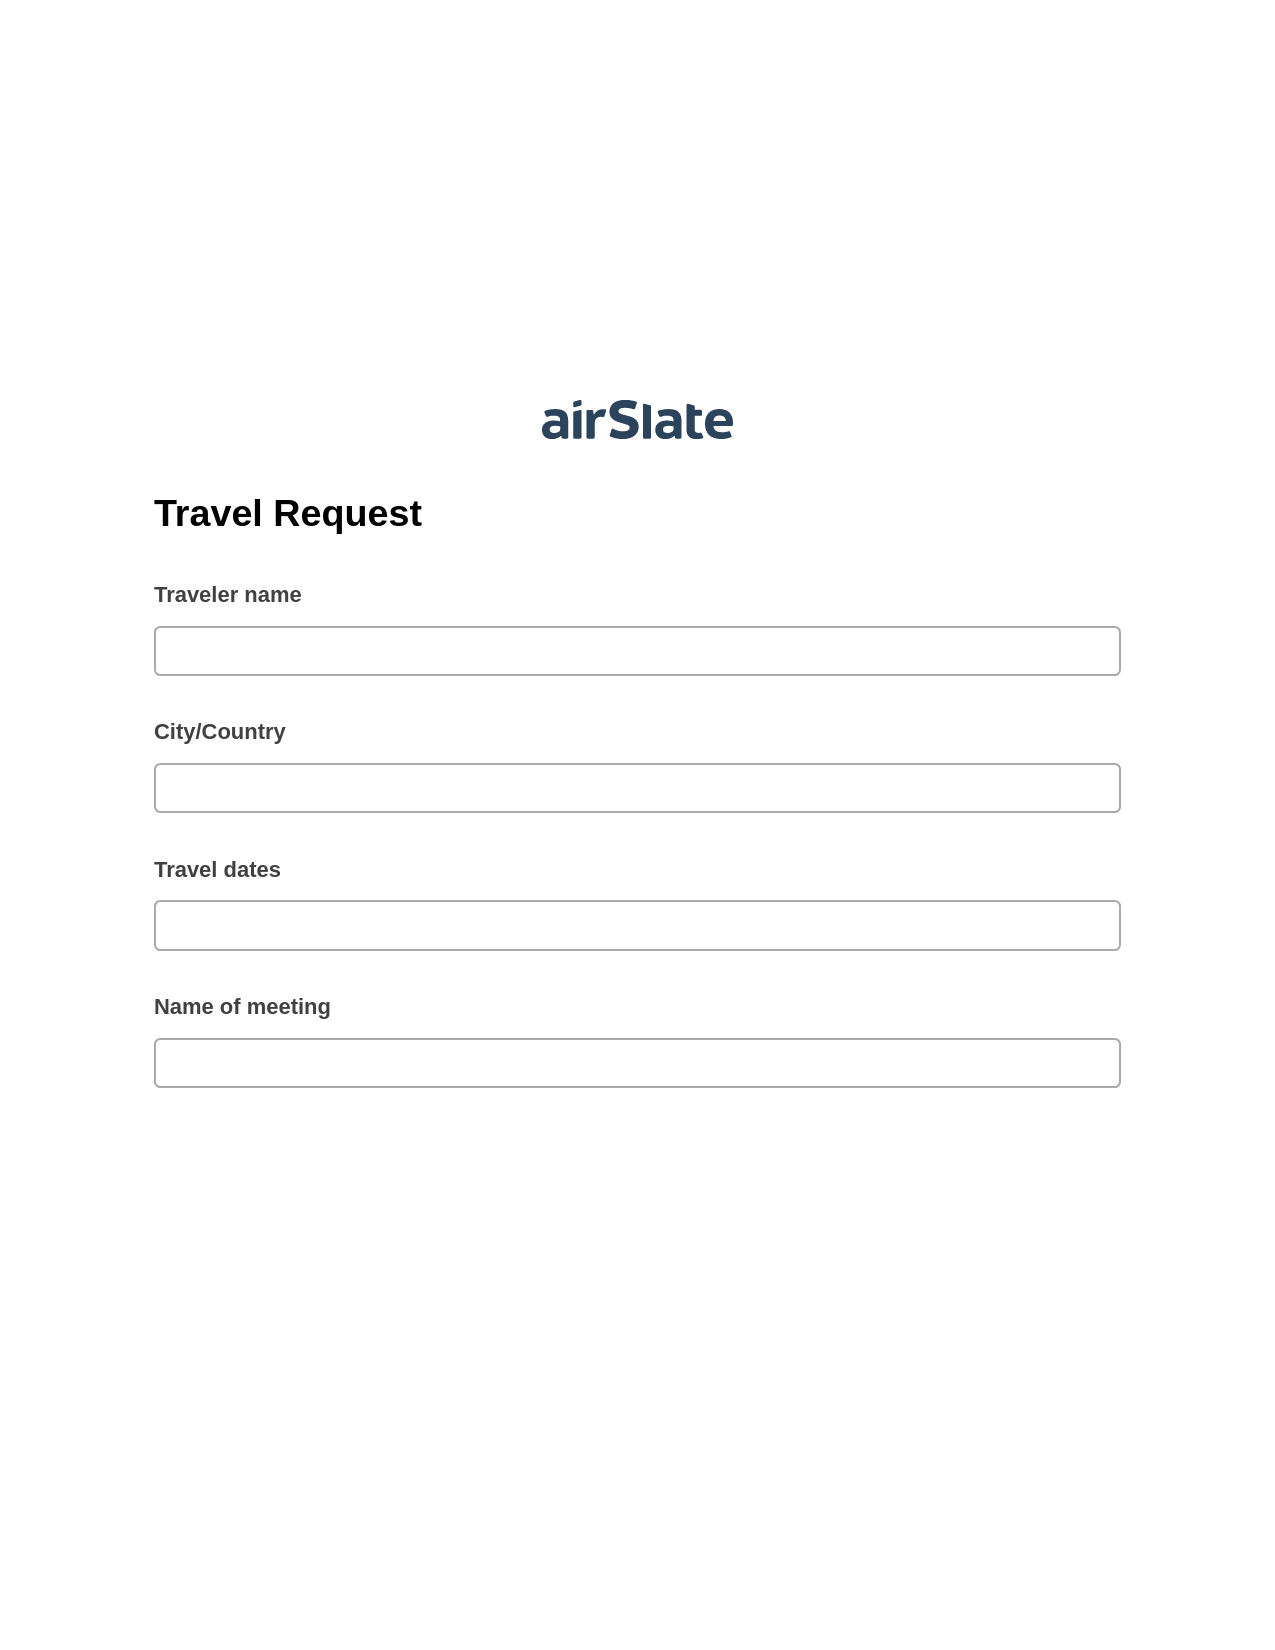 Travel Request Pre-fill from Salesforce Records with SOQL Bot, Create slate addon, Export to Excel 365 Bot